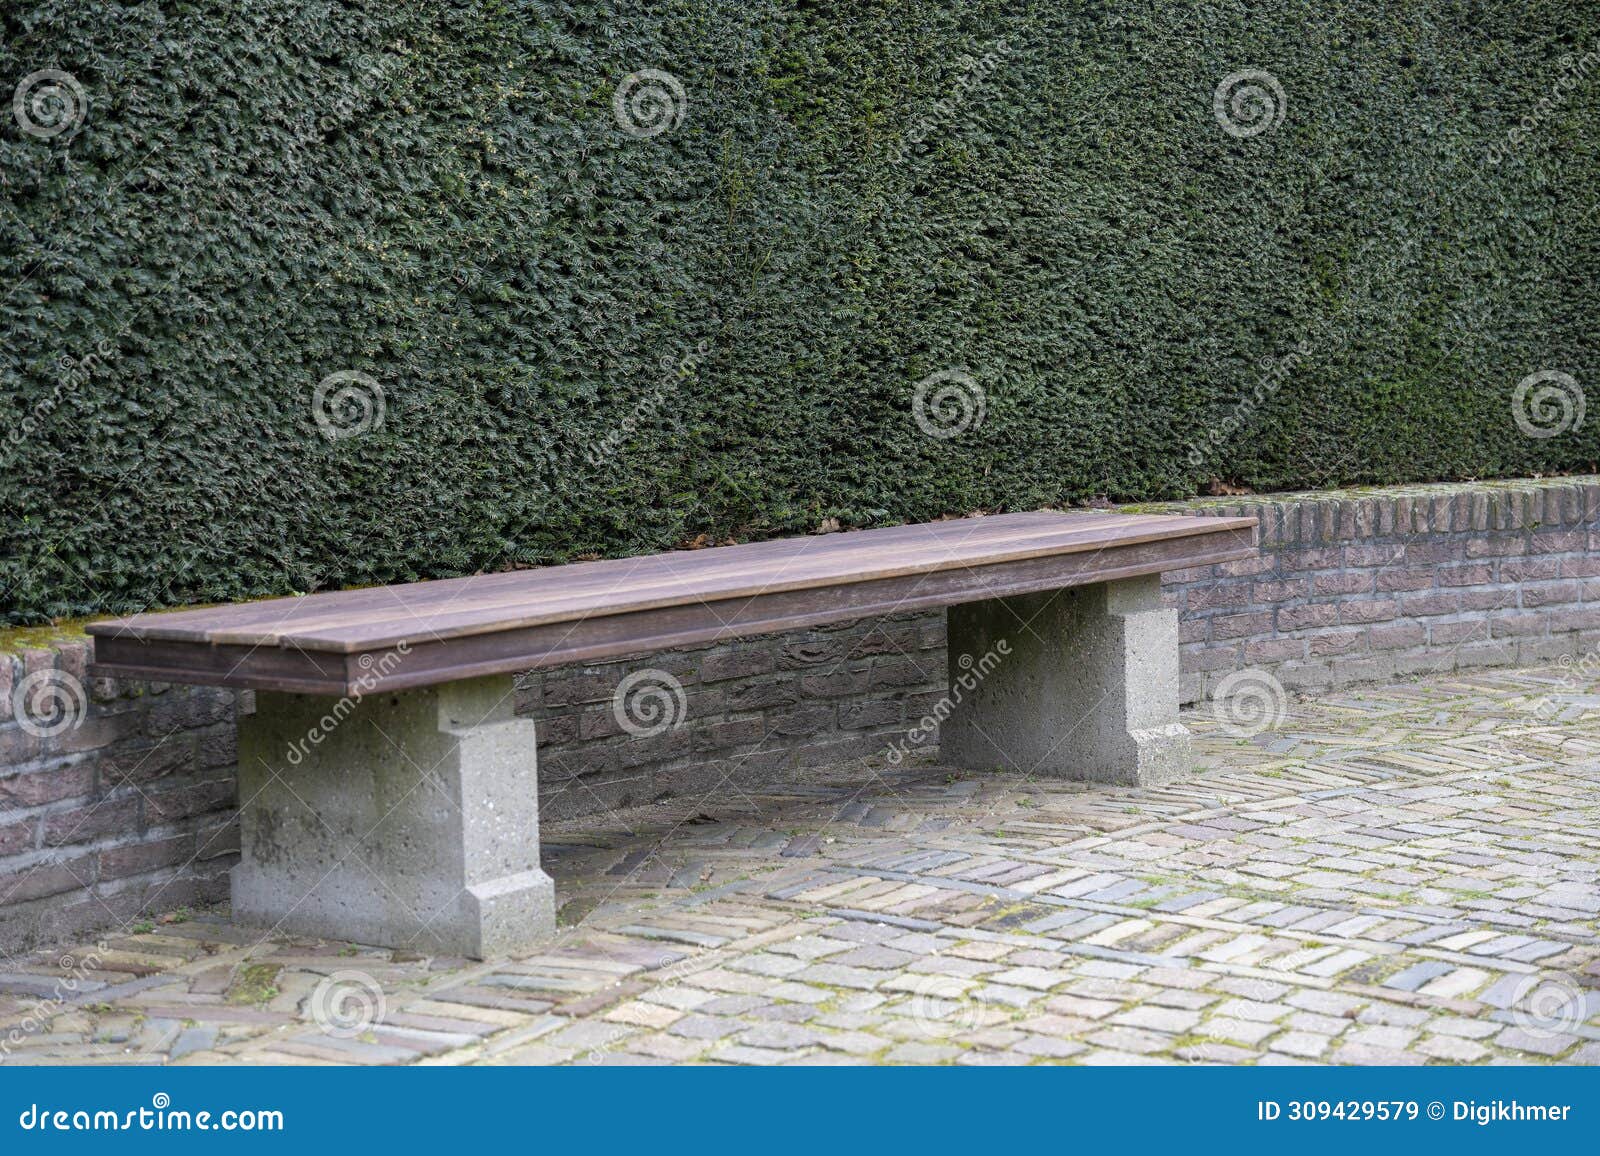 the wooden bench against a green vegetal wall